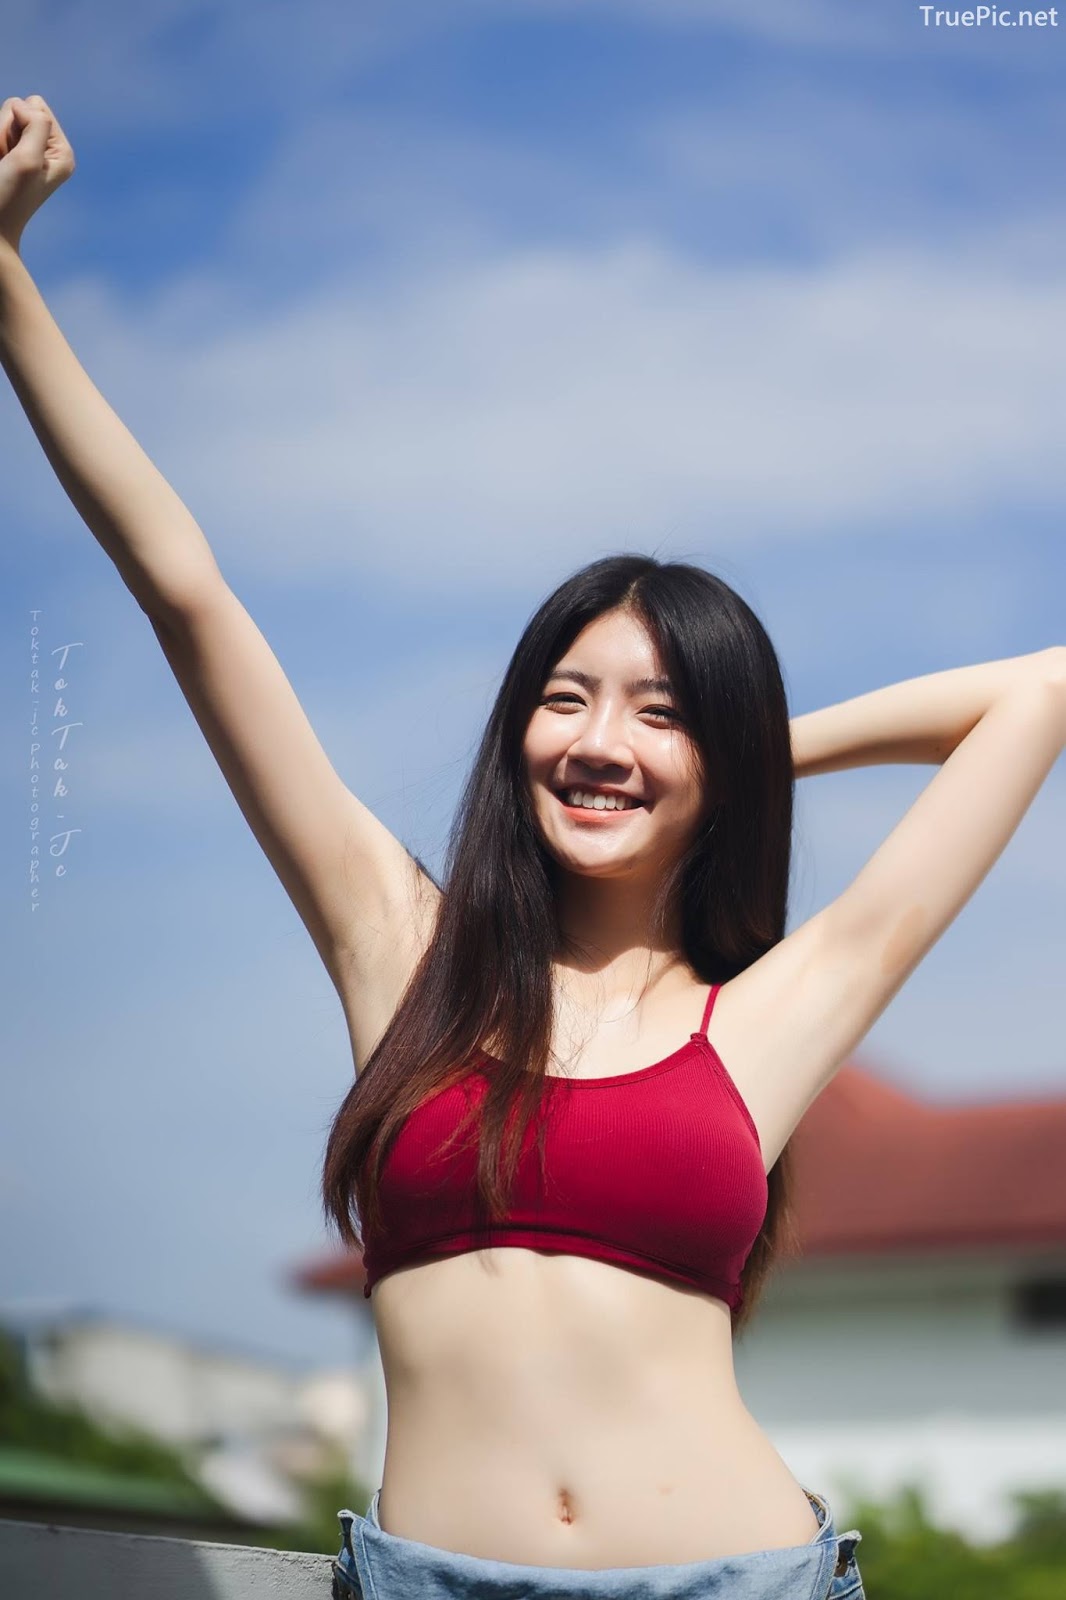 Thailand angel model Sasi Ngiunwan - Red plum bra and jean on a beautiful day - Picture 15